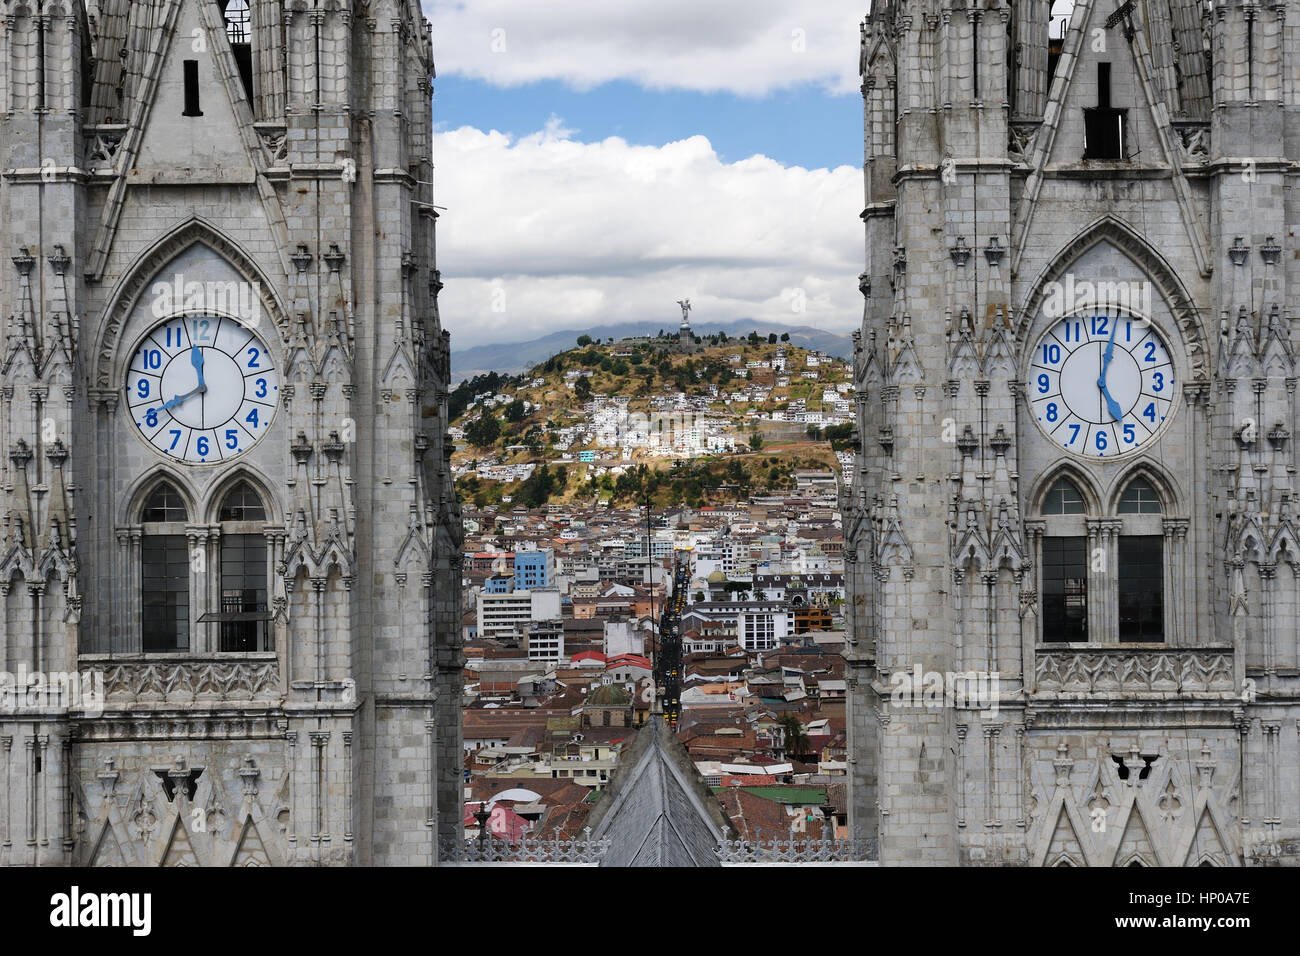 Quito - the capital of Ecuador. Quito is a beautifllly set city, packed with historical monuments and architectural treasures. The picture present vie Stock Photo